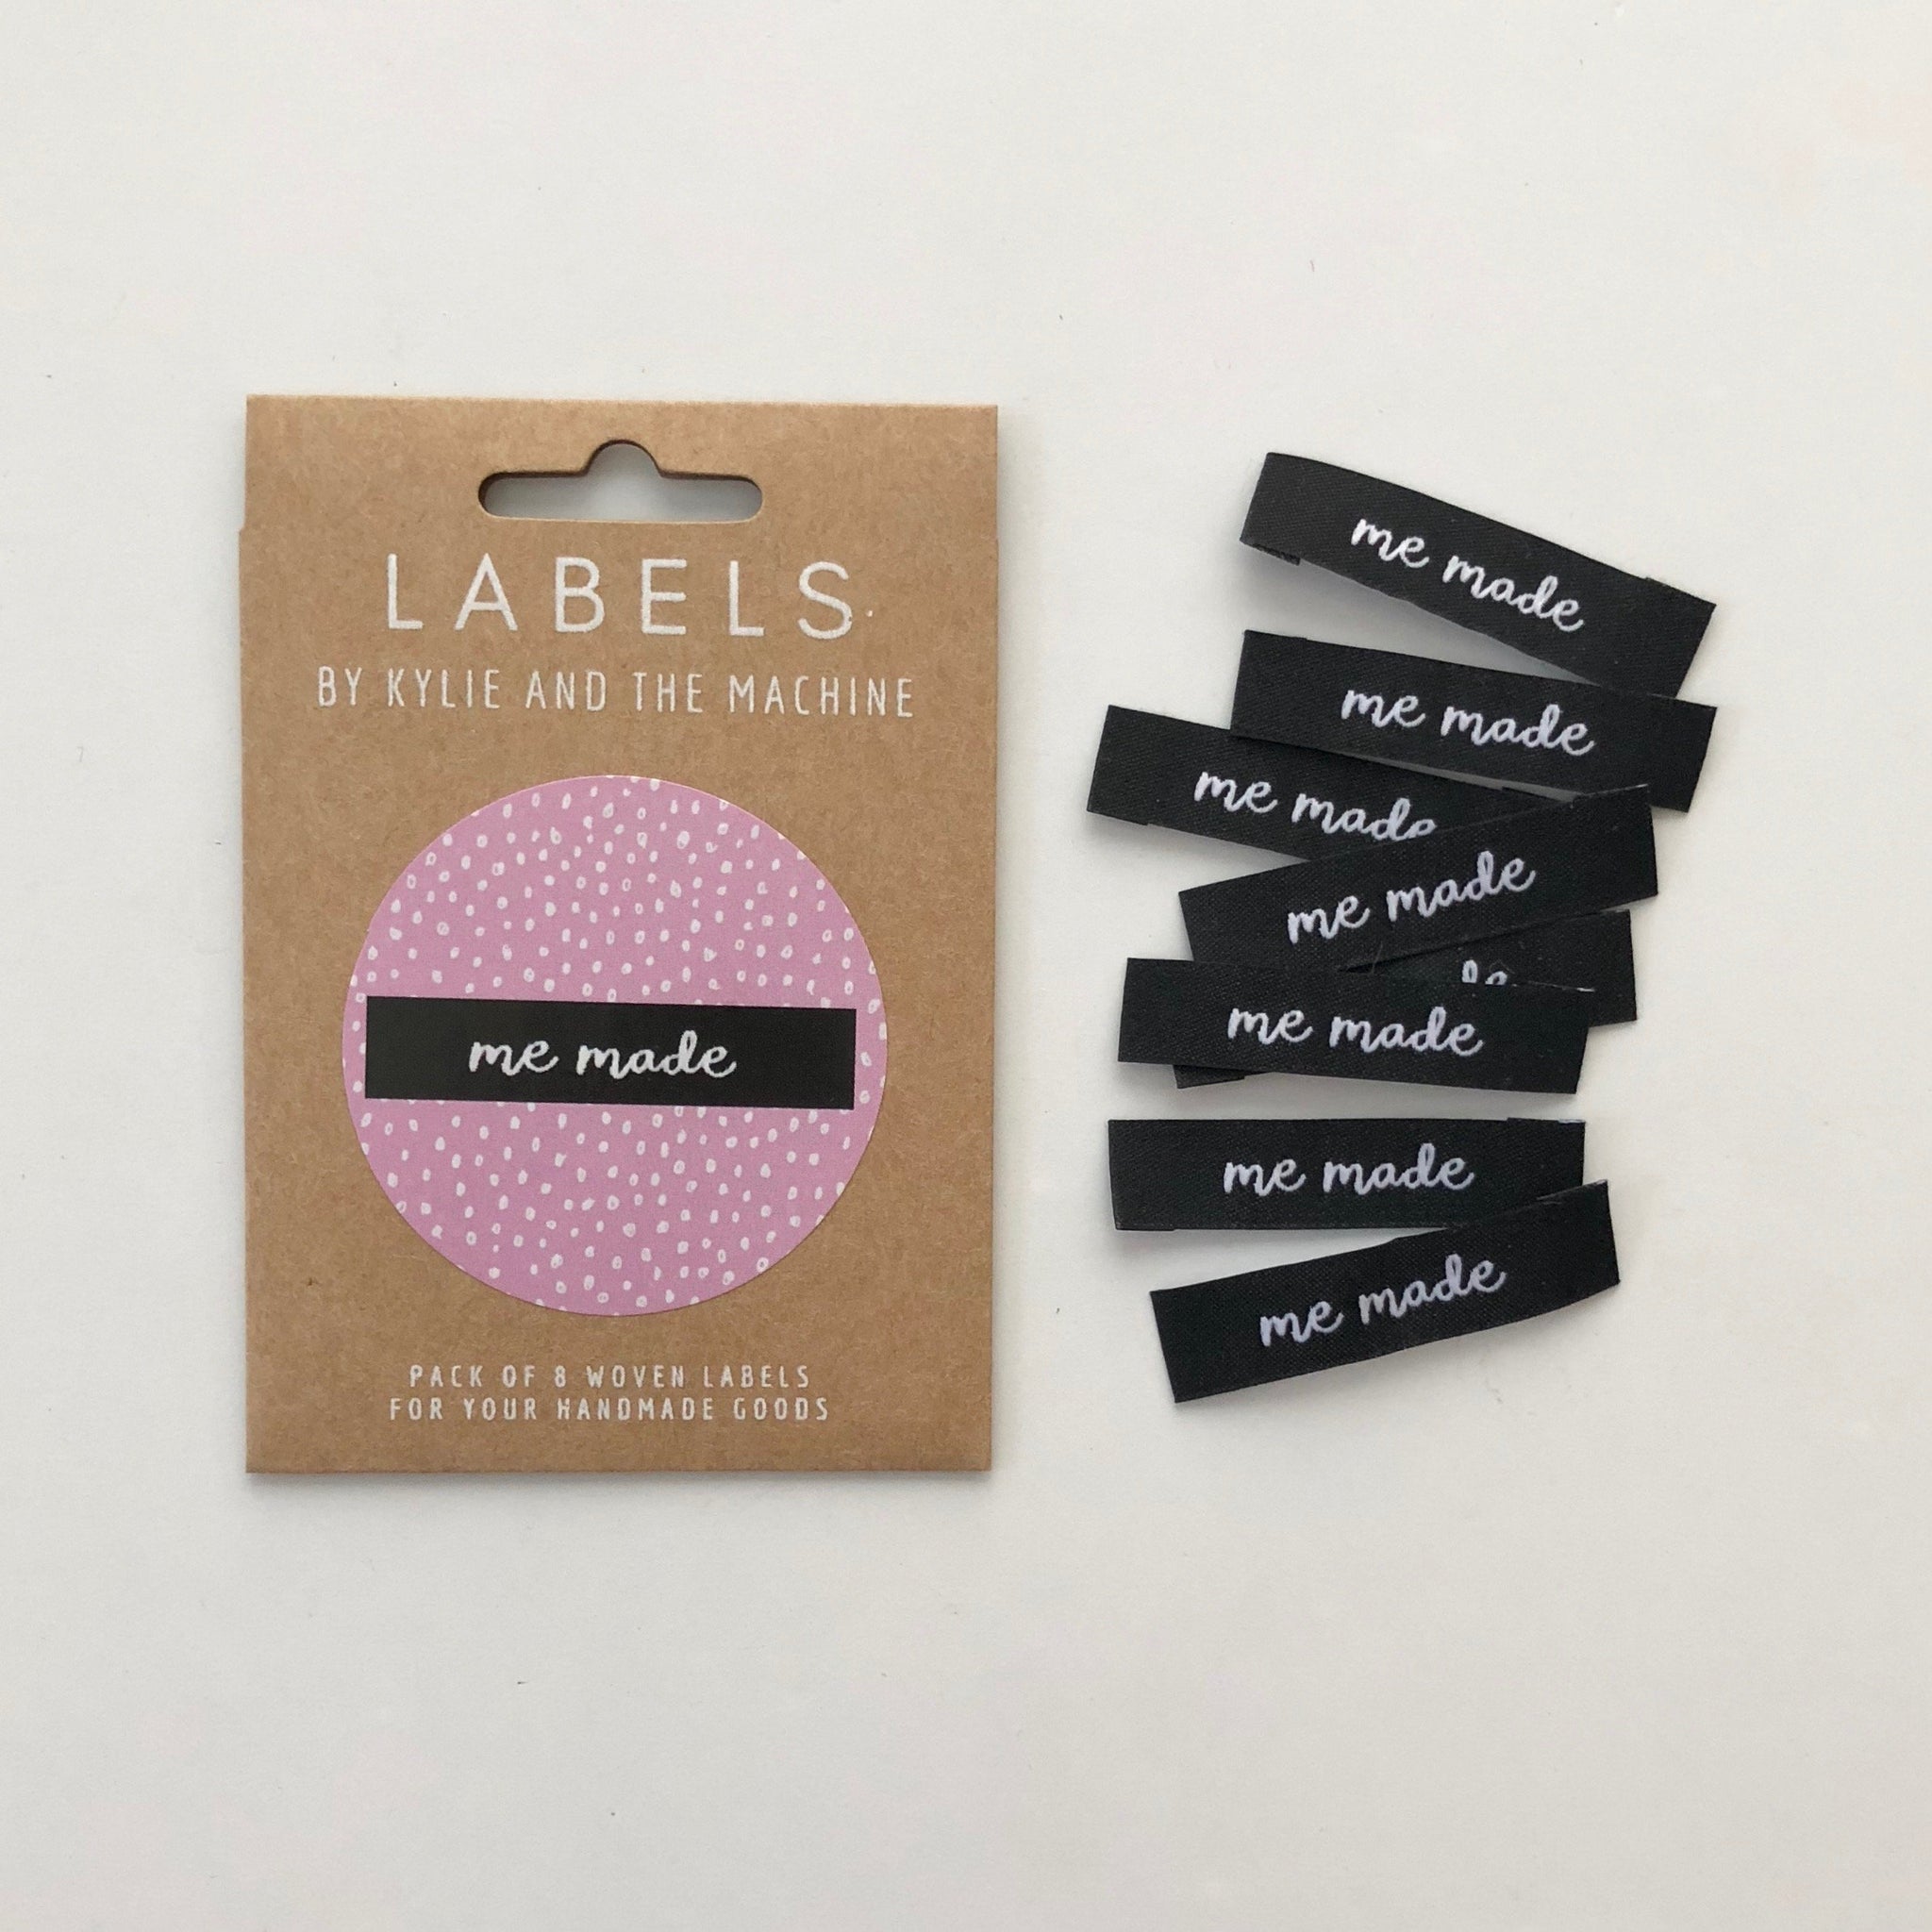 Kylie and the Machine "ME MADE" Woven Labels 8 Pack - The Little Grey Girl